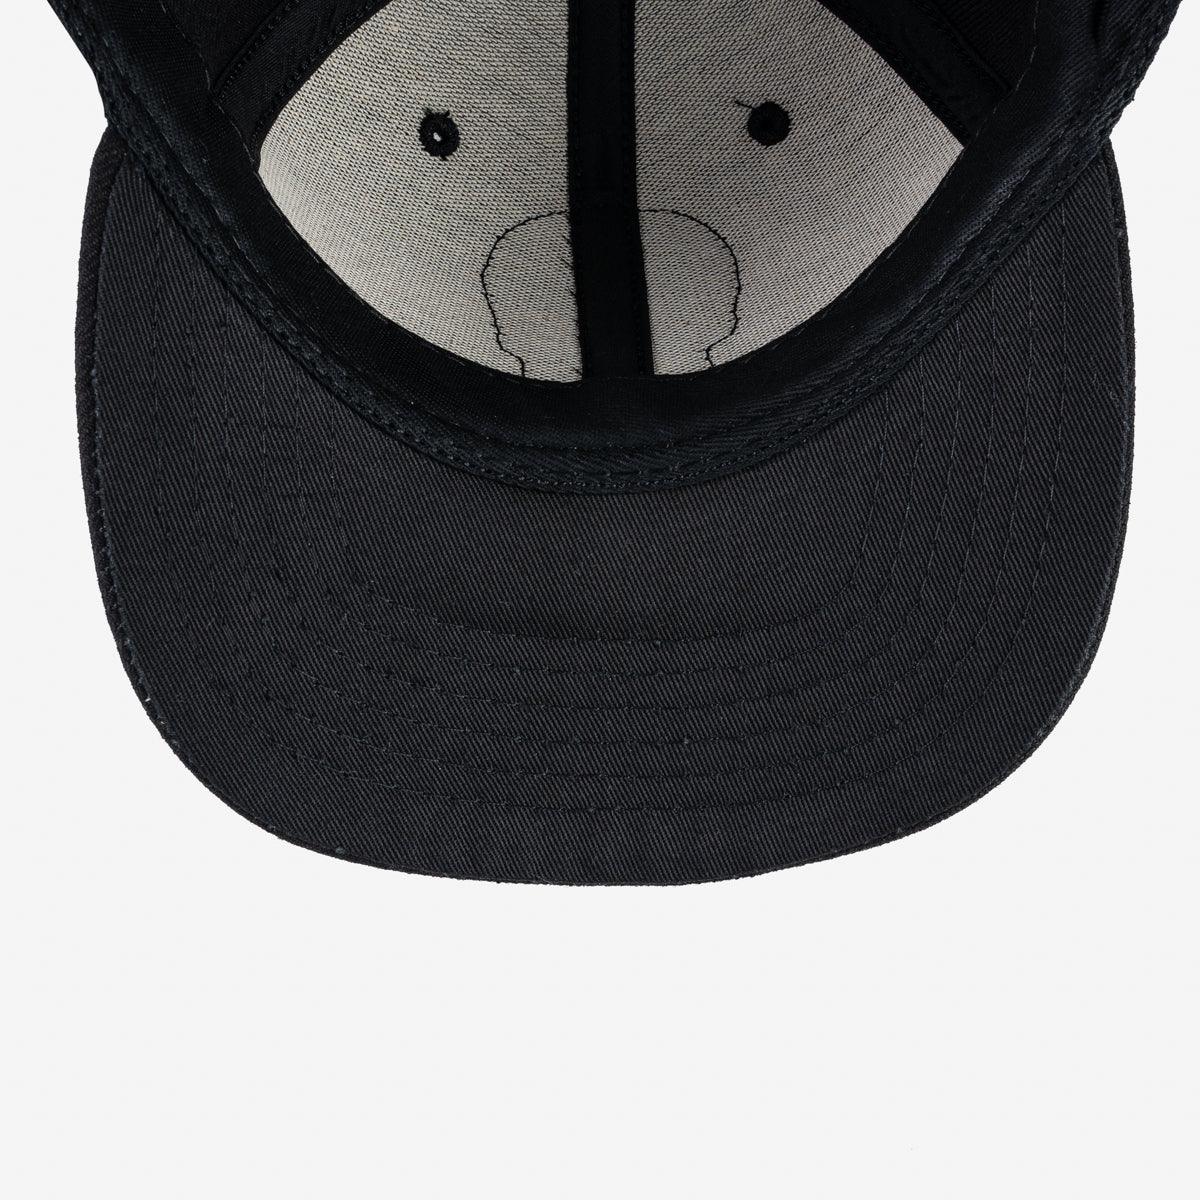 Image showing the IHC-19-ITTB - Iron Heart IRON TO THE BONE Snapback Cap - Black which is a Headgear described by the following info Accessories, Headgear, Iron Heart, Released and sold on the IRON HEART GERMANY online store